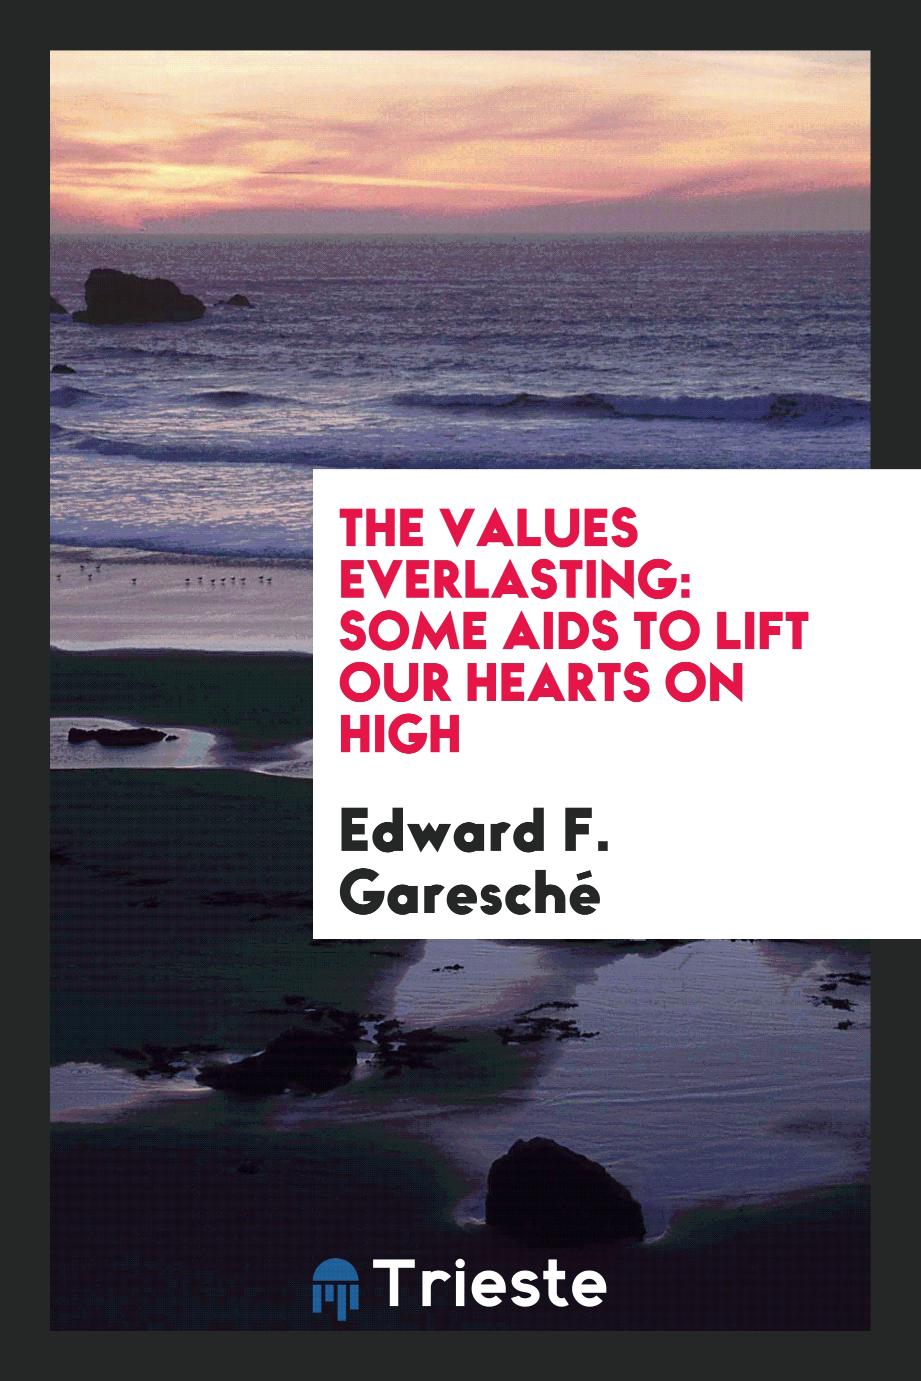 The values everlasting: some aids to lift our hearts on high